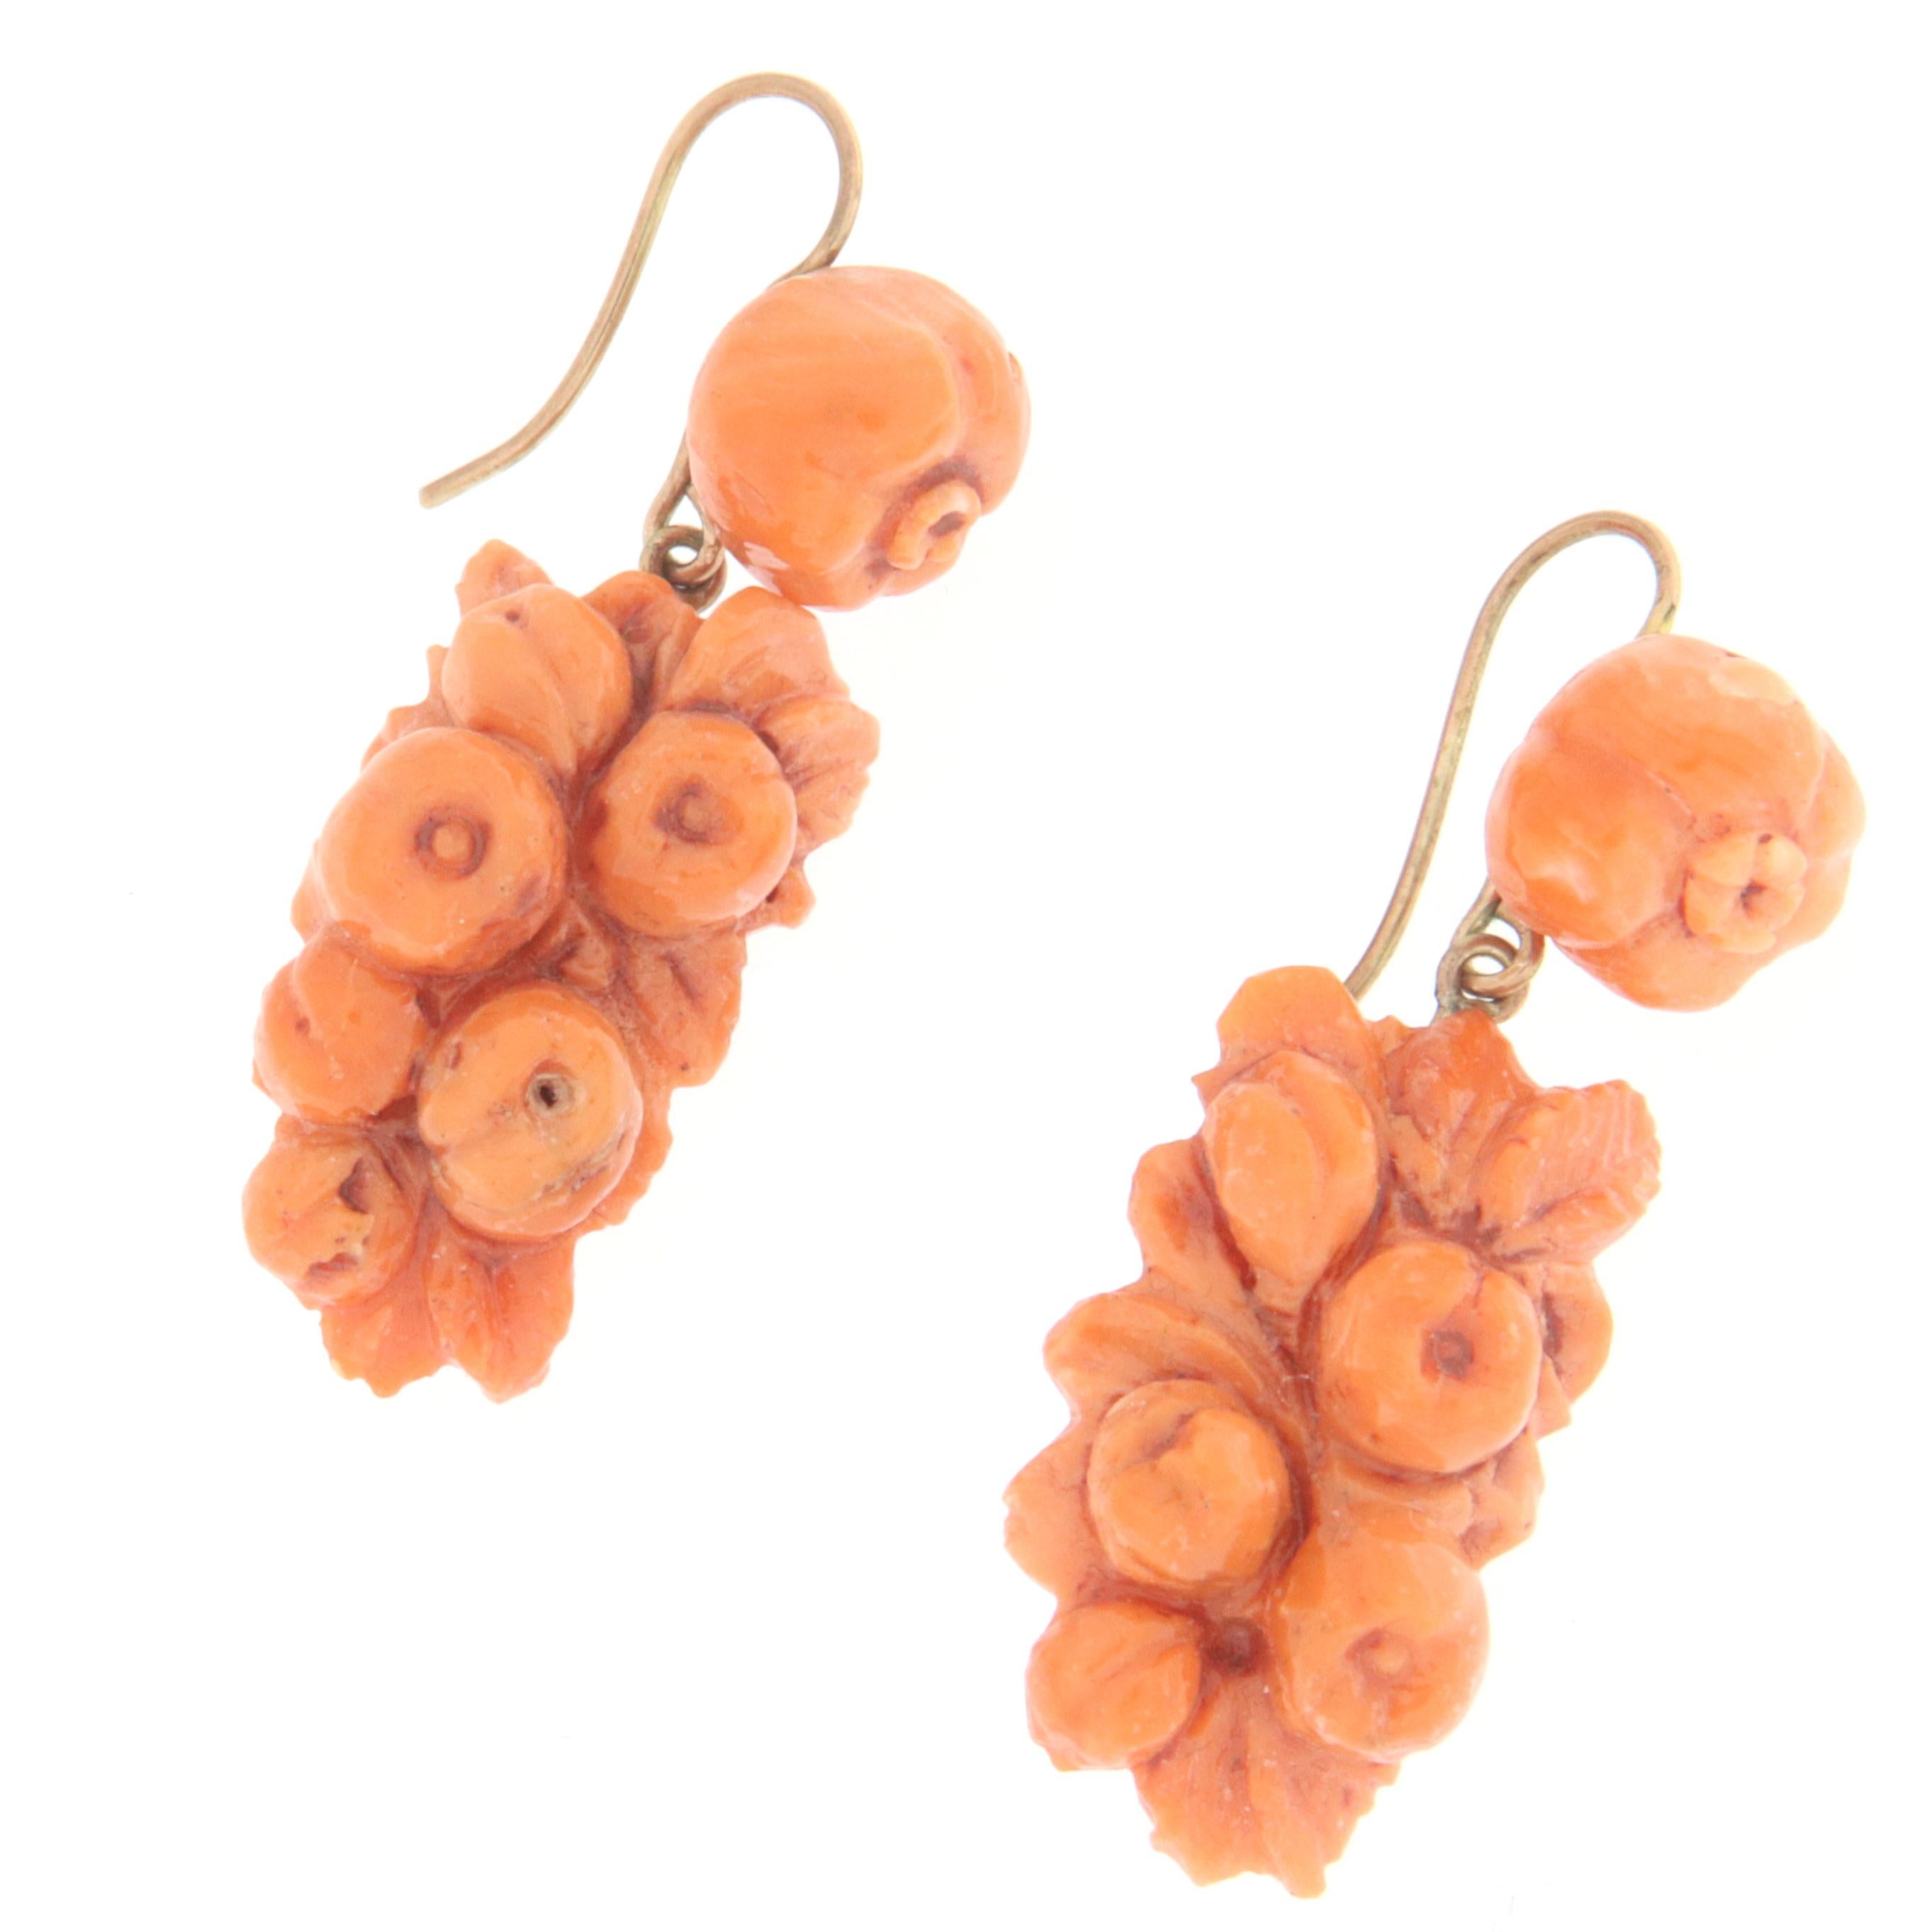 9 karat yellow gold drop earrings. Handmade by artisans assembled with Sicily natural coral 

Earrings total weight 12.40 grams
